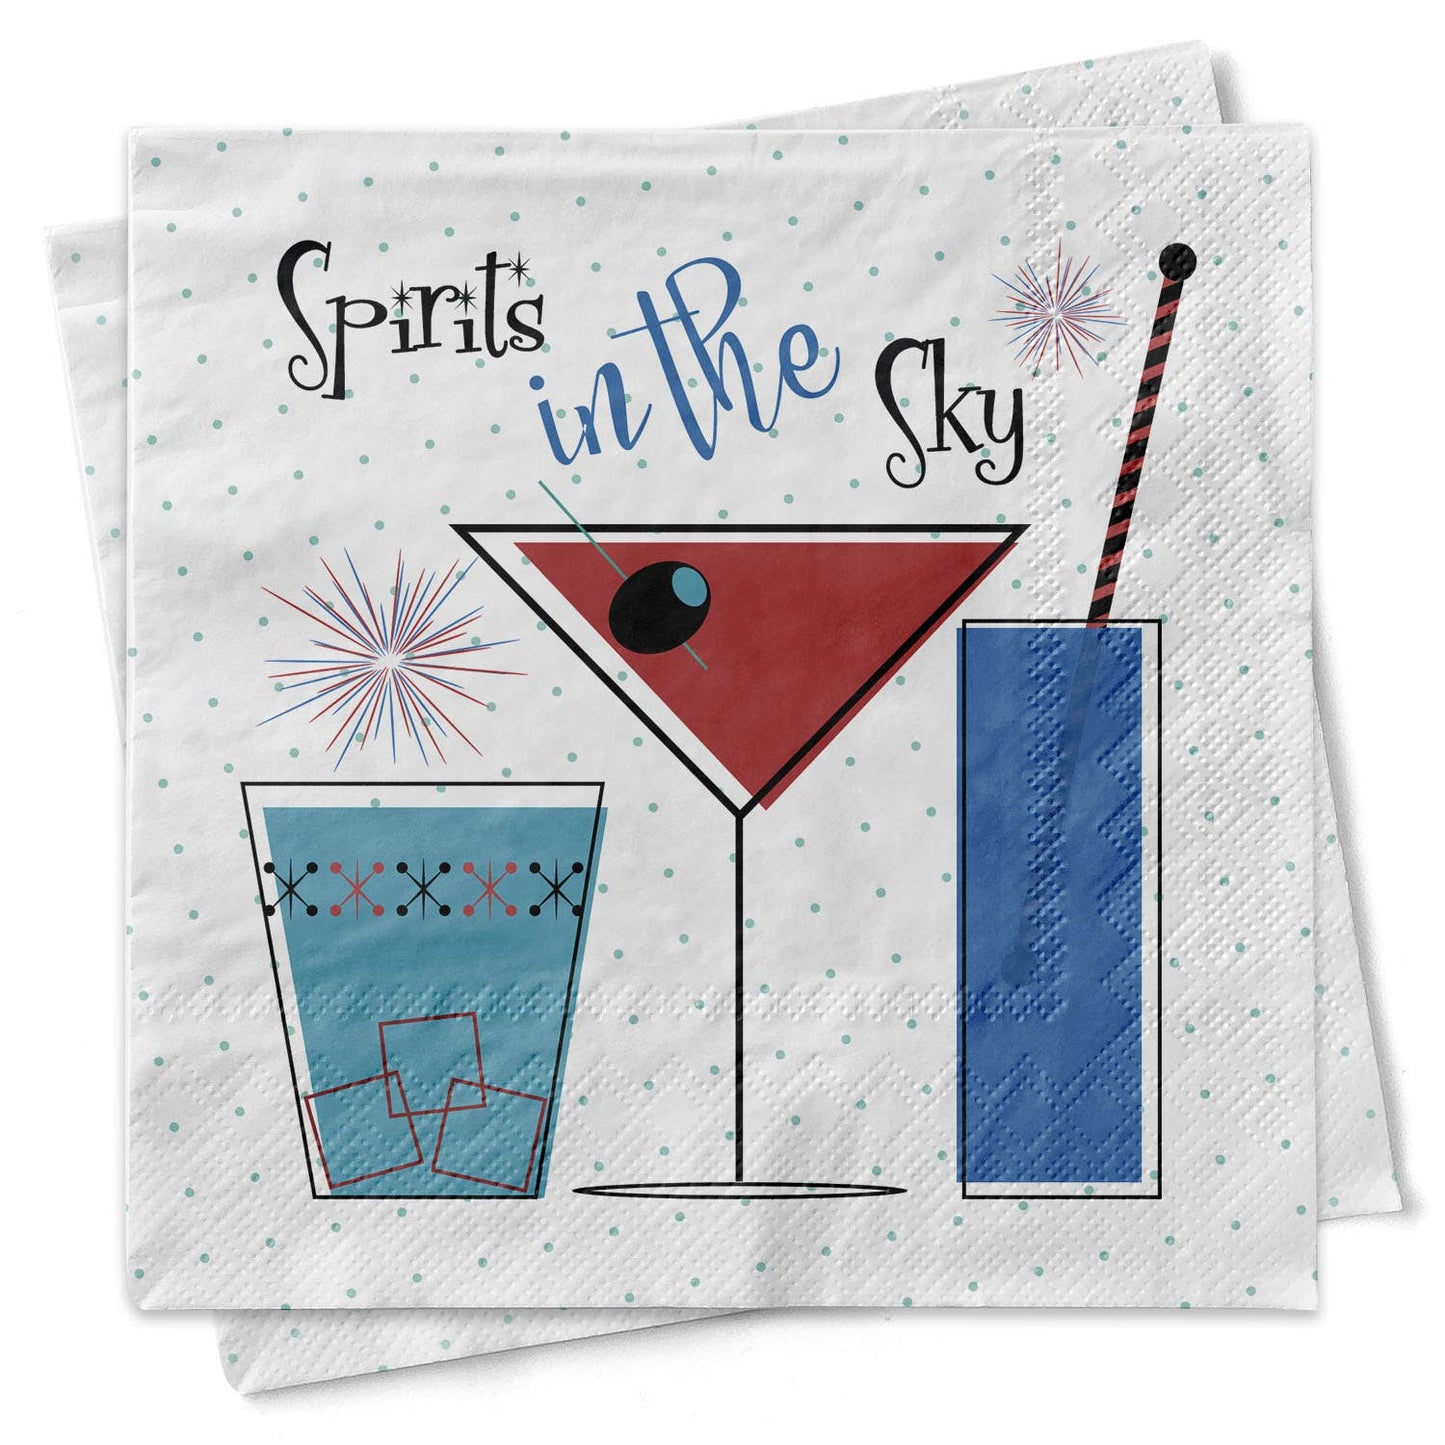 Mod Lounge Paper Company - Spirits in the Sky Cocktail Beverage Napkin - Fenwick & OliverMod Lounge Paper Company - Spirits in the Sky Cocktail Beverage NapkinMod Lounge Paper CompanyFenwick & OliverBN-020